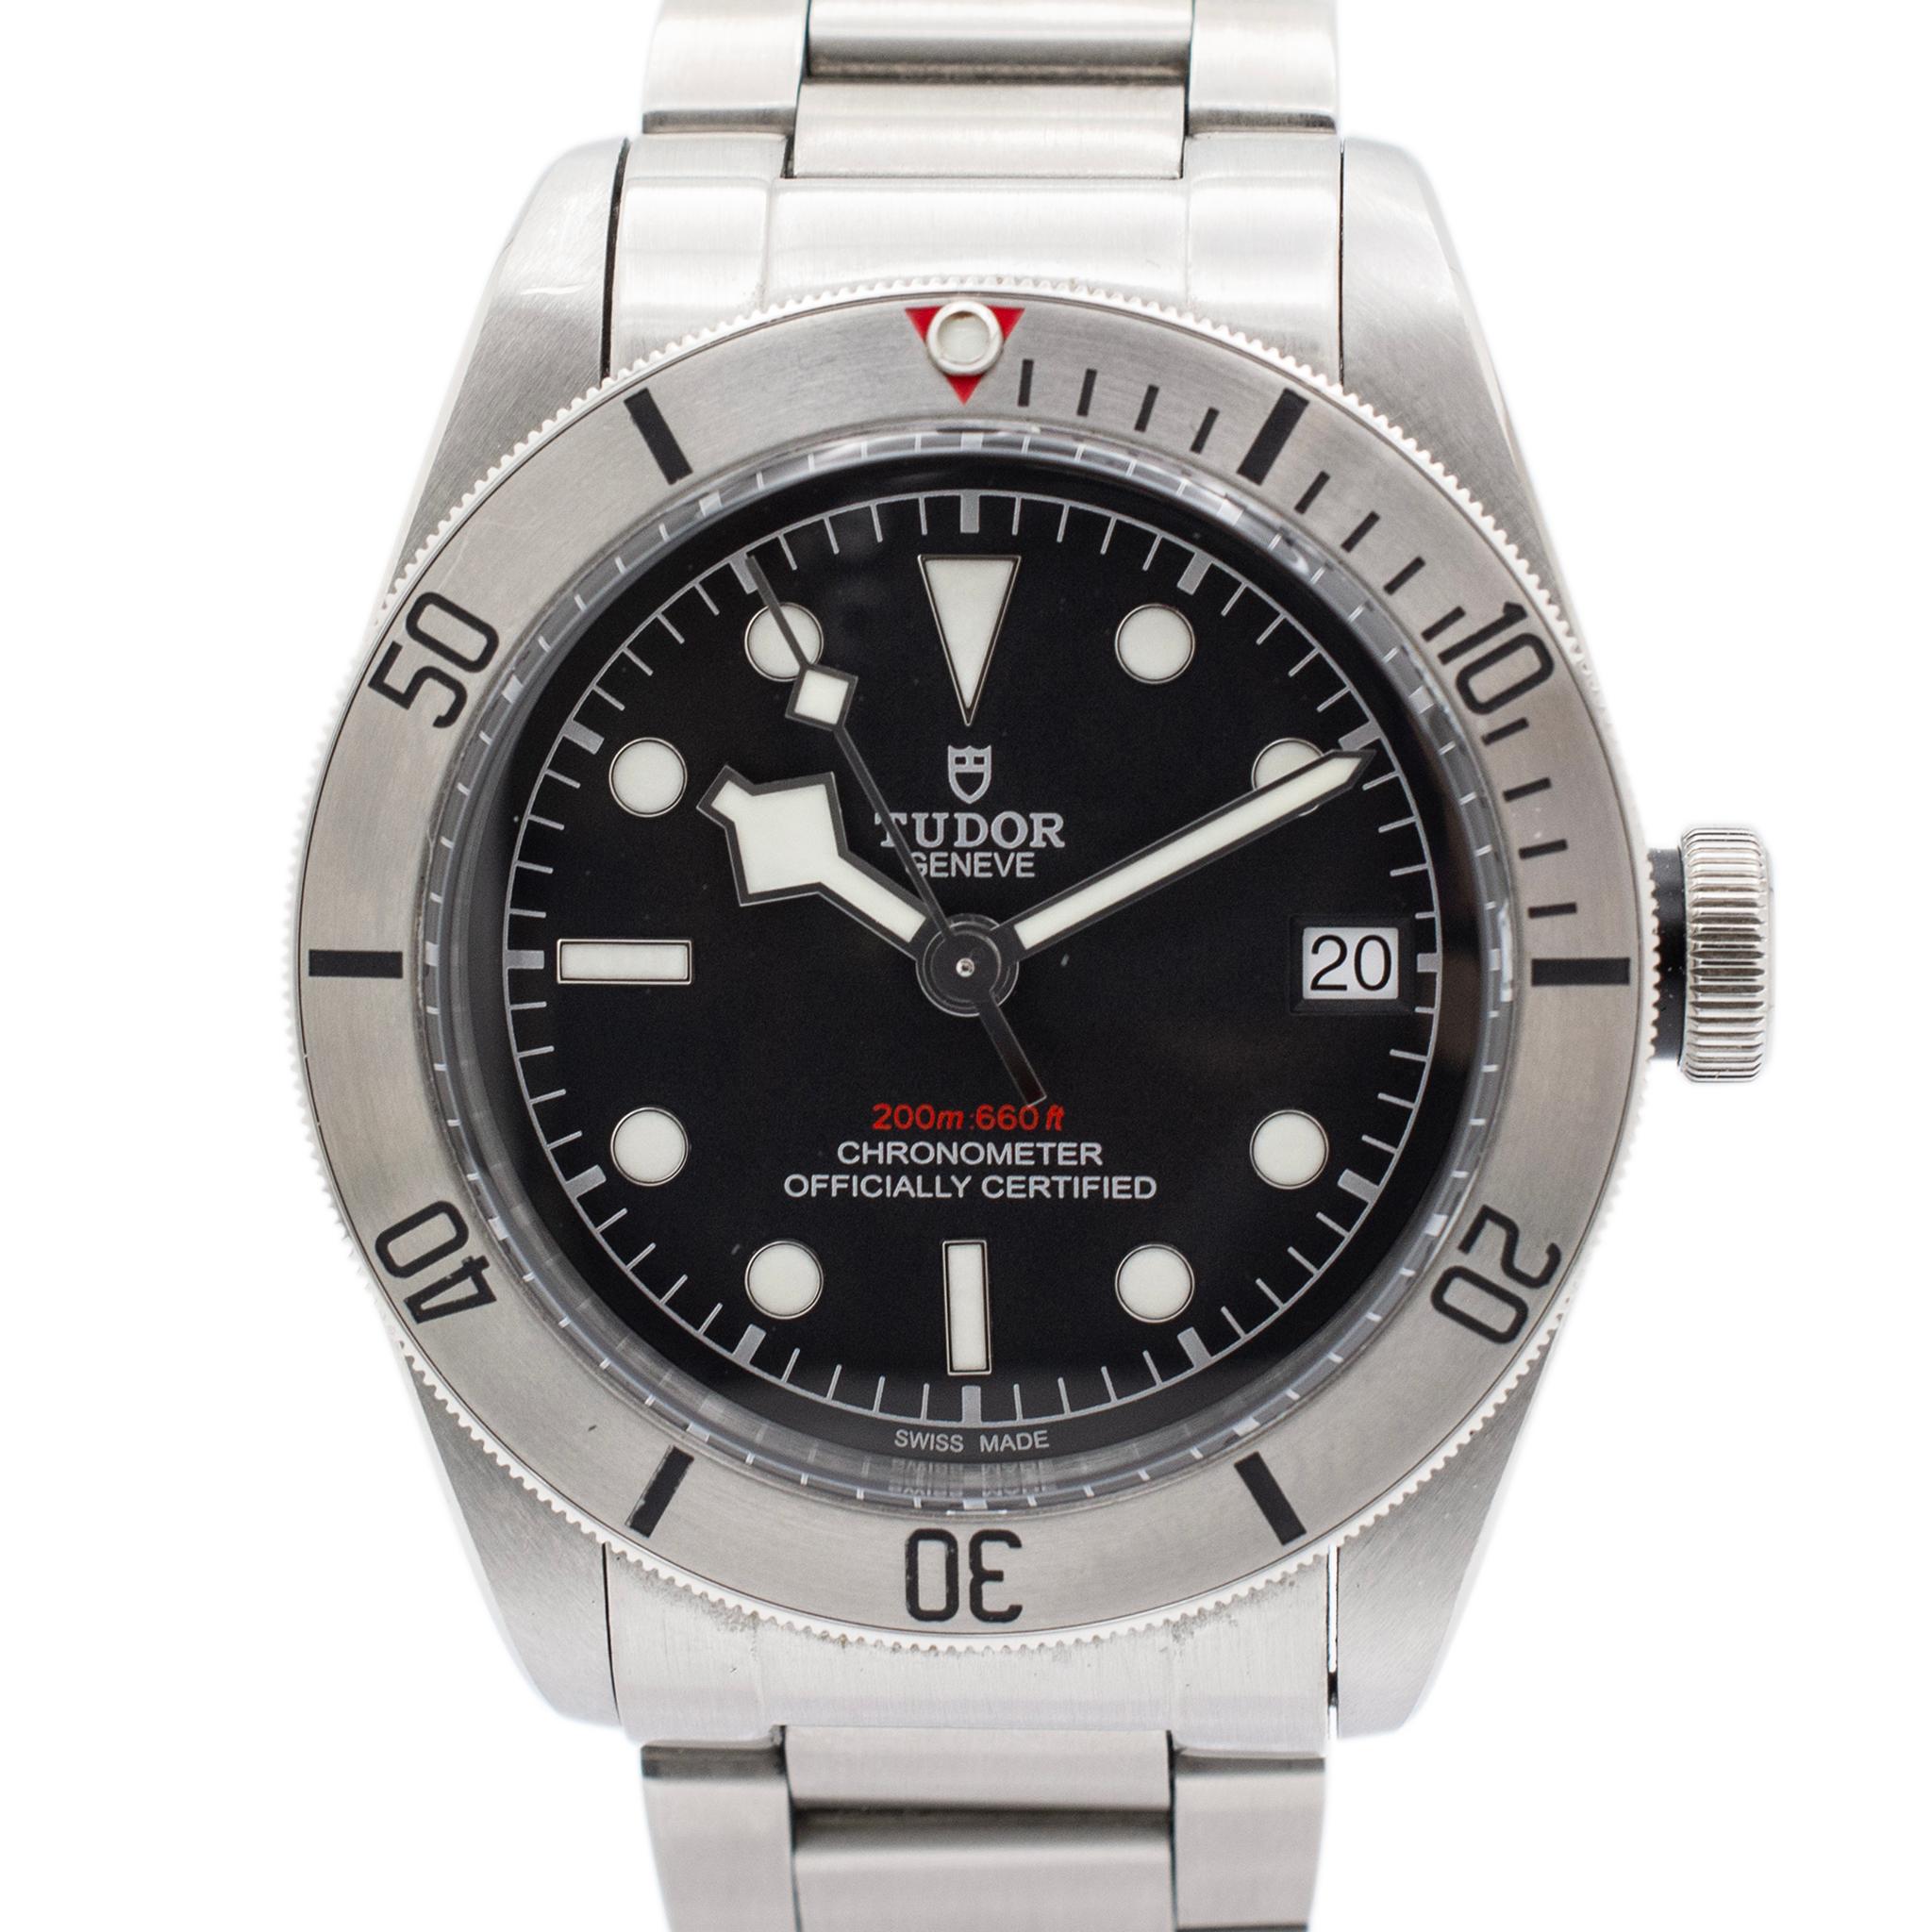 Brand: Tudor

Gender: Men's

Metal Type: Stainless Steel

Diameter: 41.00 mm

Weight: 172.97 grams

Gent's stainless steel TUDOR Swiss made watch with original box. The metal was tested and determined to be stainless steel. The 